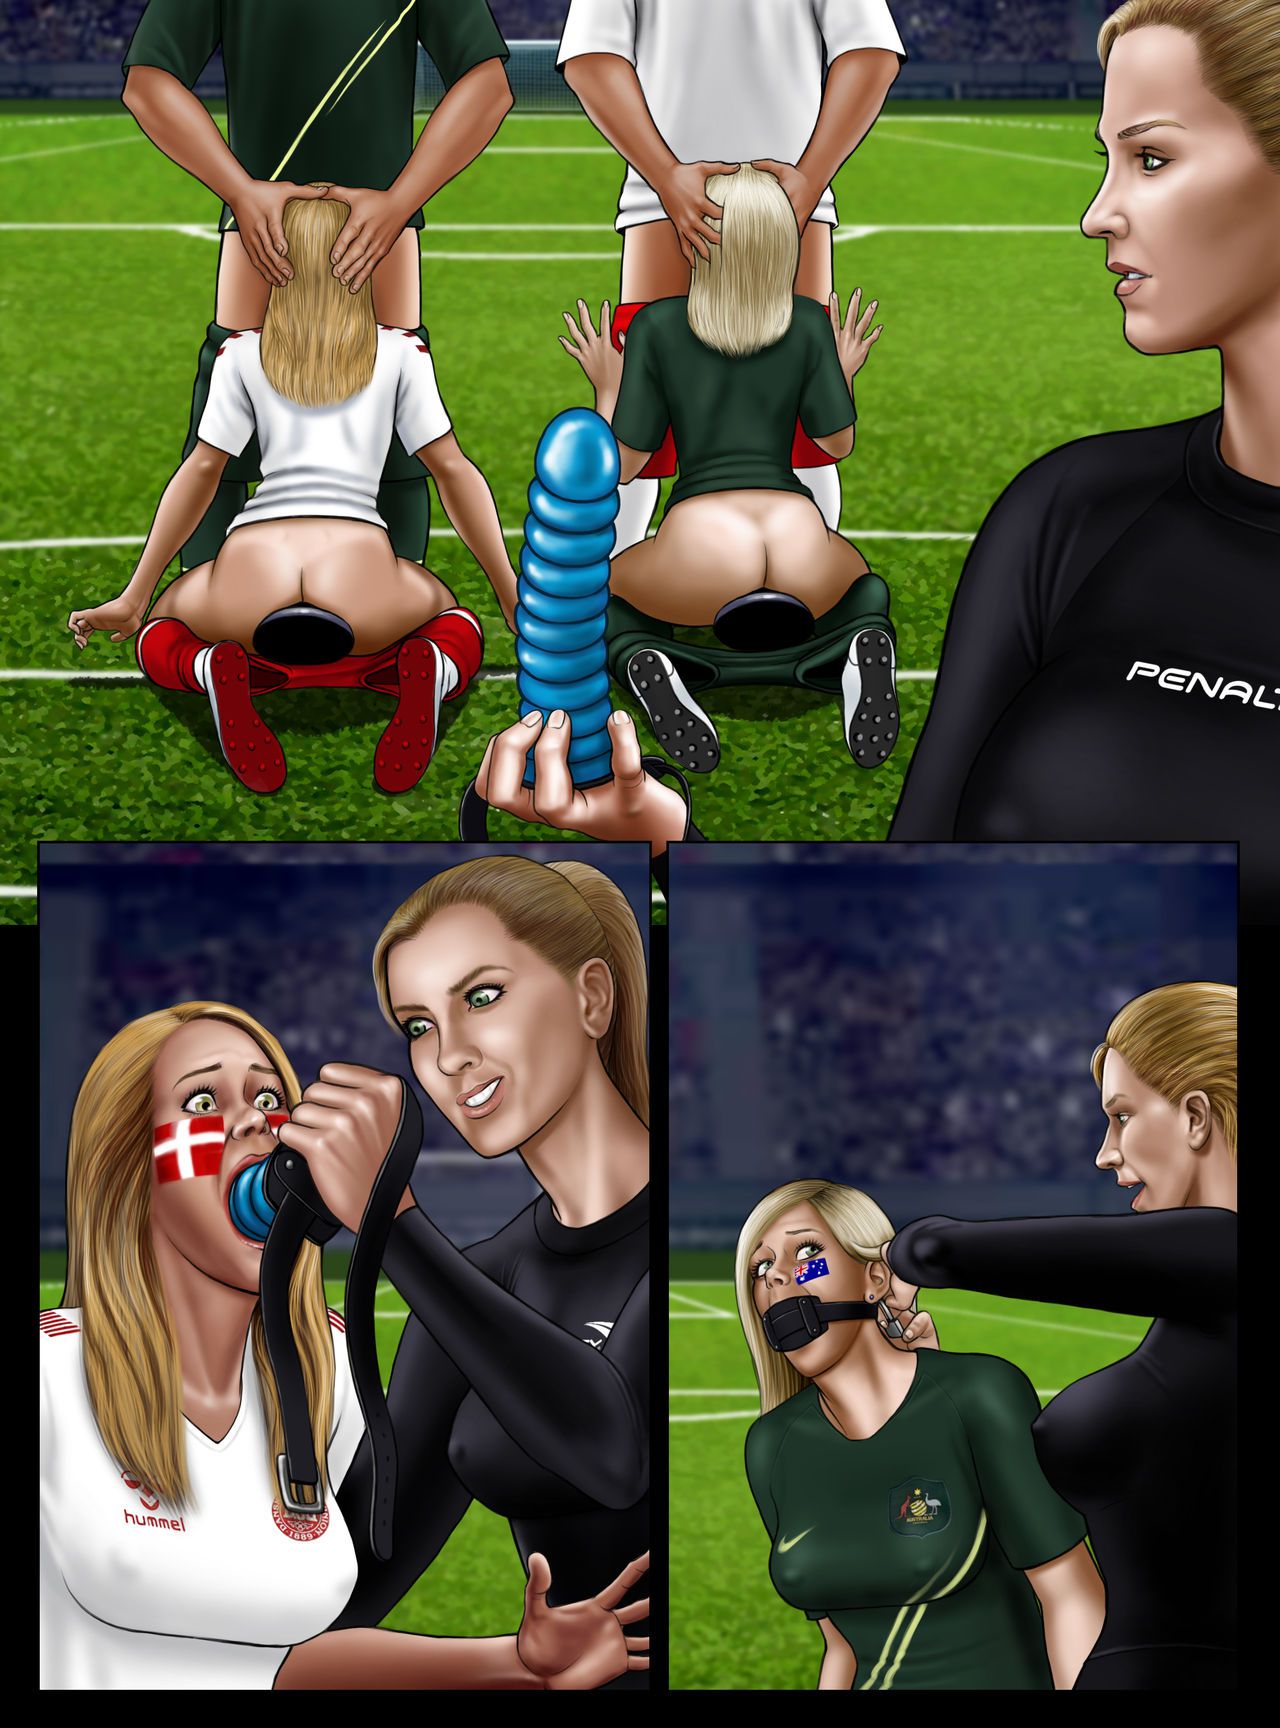 [Extro] FIFA World Cup Russia 2018 - Soccer Hentai - Women's World Cup France 2019 (Ongoing) [Korean] 37